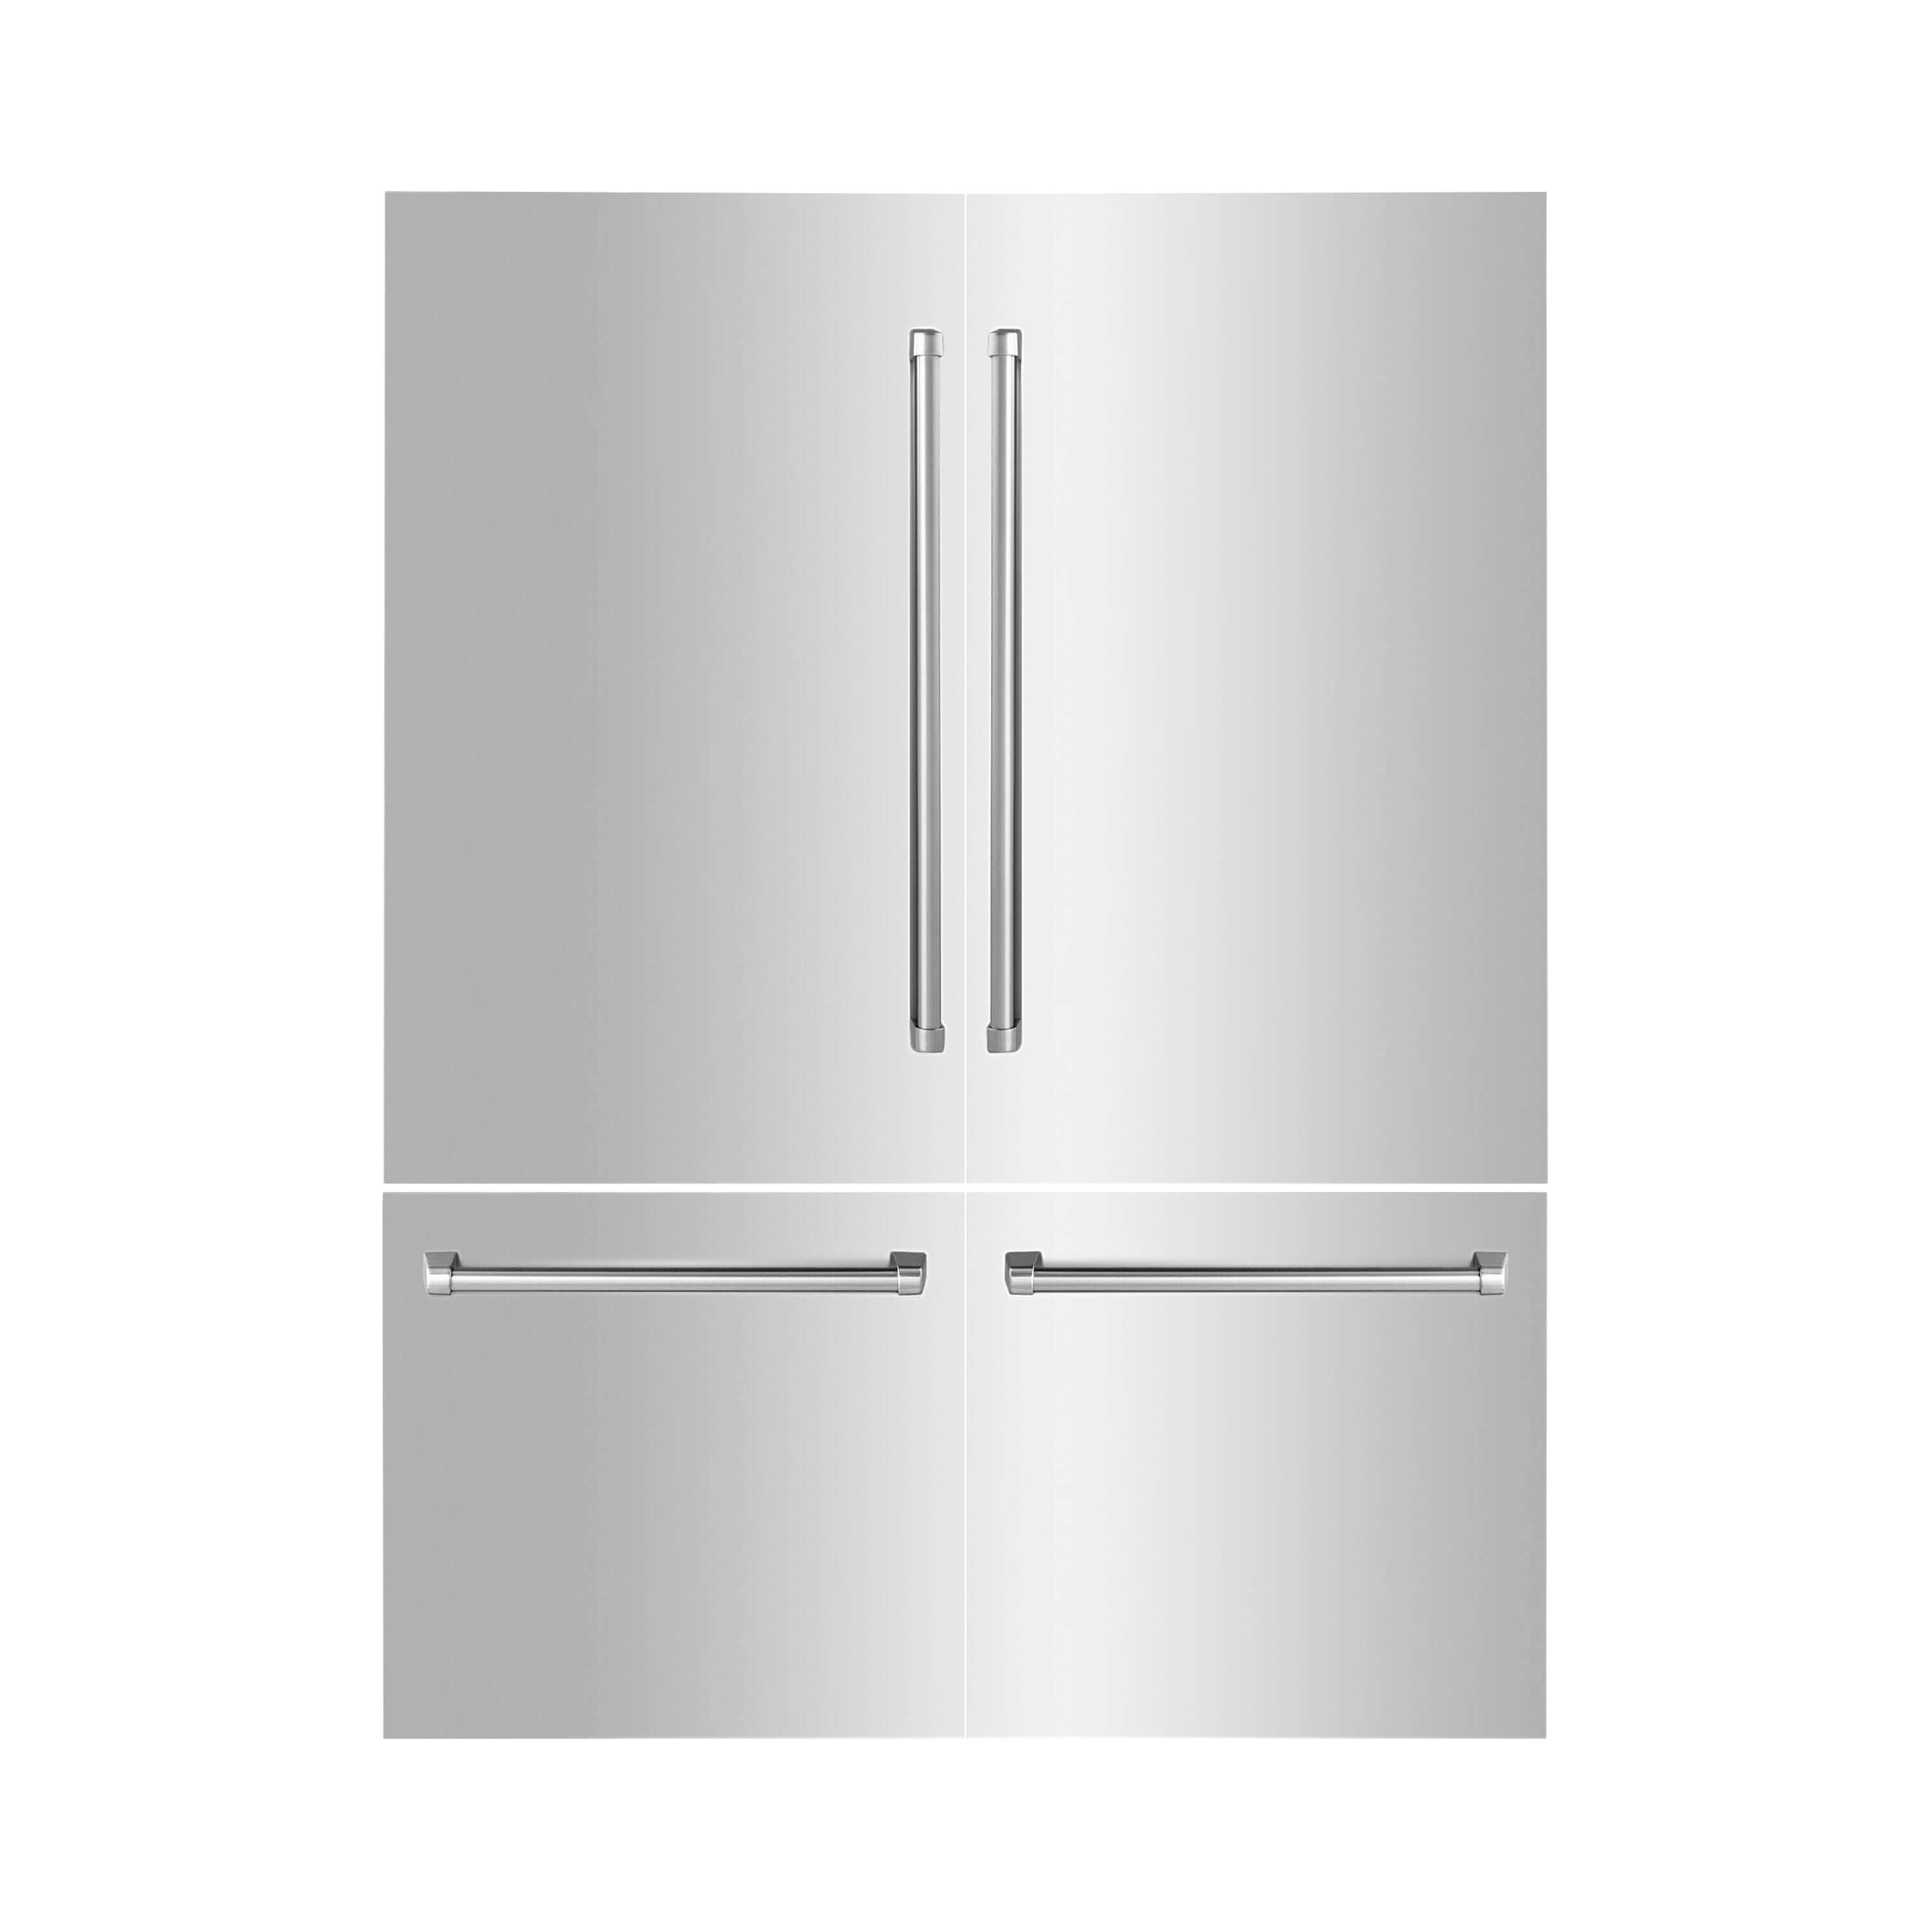 Panels & Handles Only- ZLINE 60 in. Refrigerator Panels in Stainless Steel for a 60 in. Built-in Refrigerator (RPBIV-304-60)